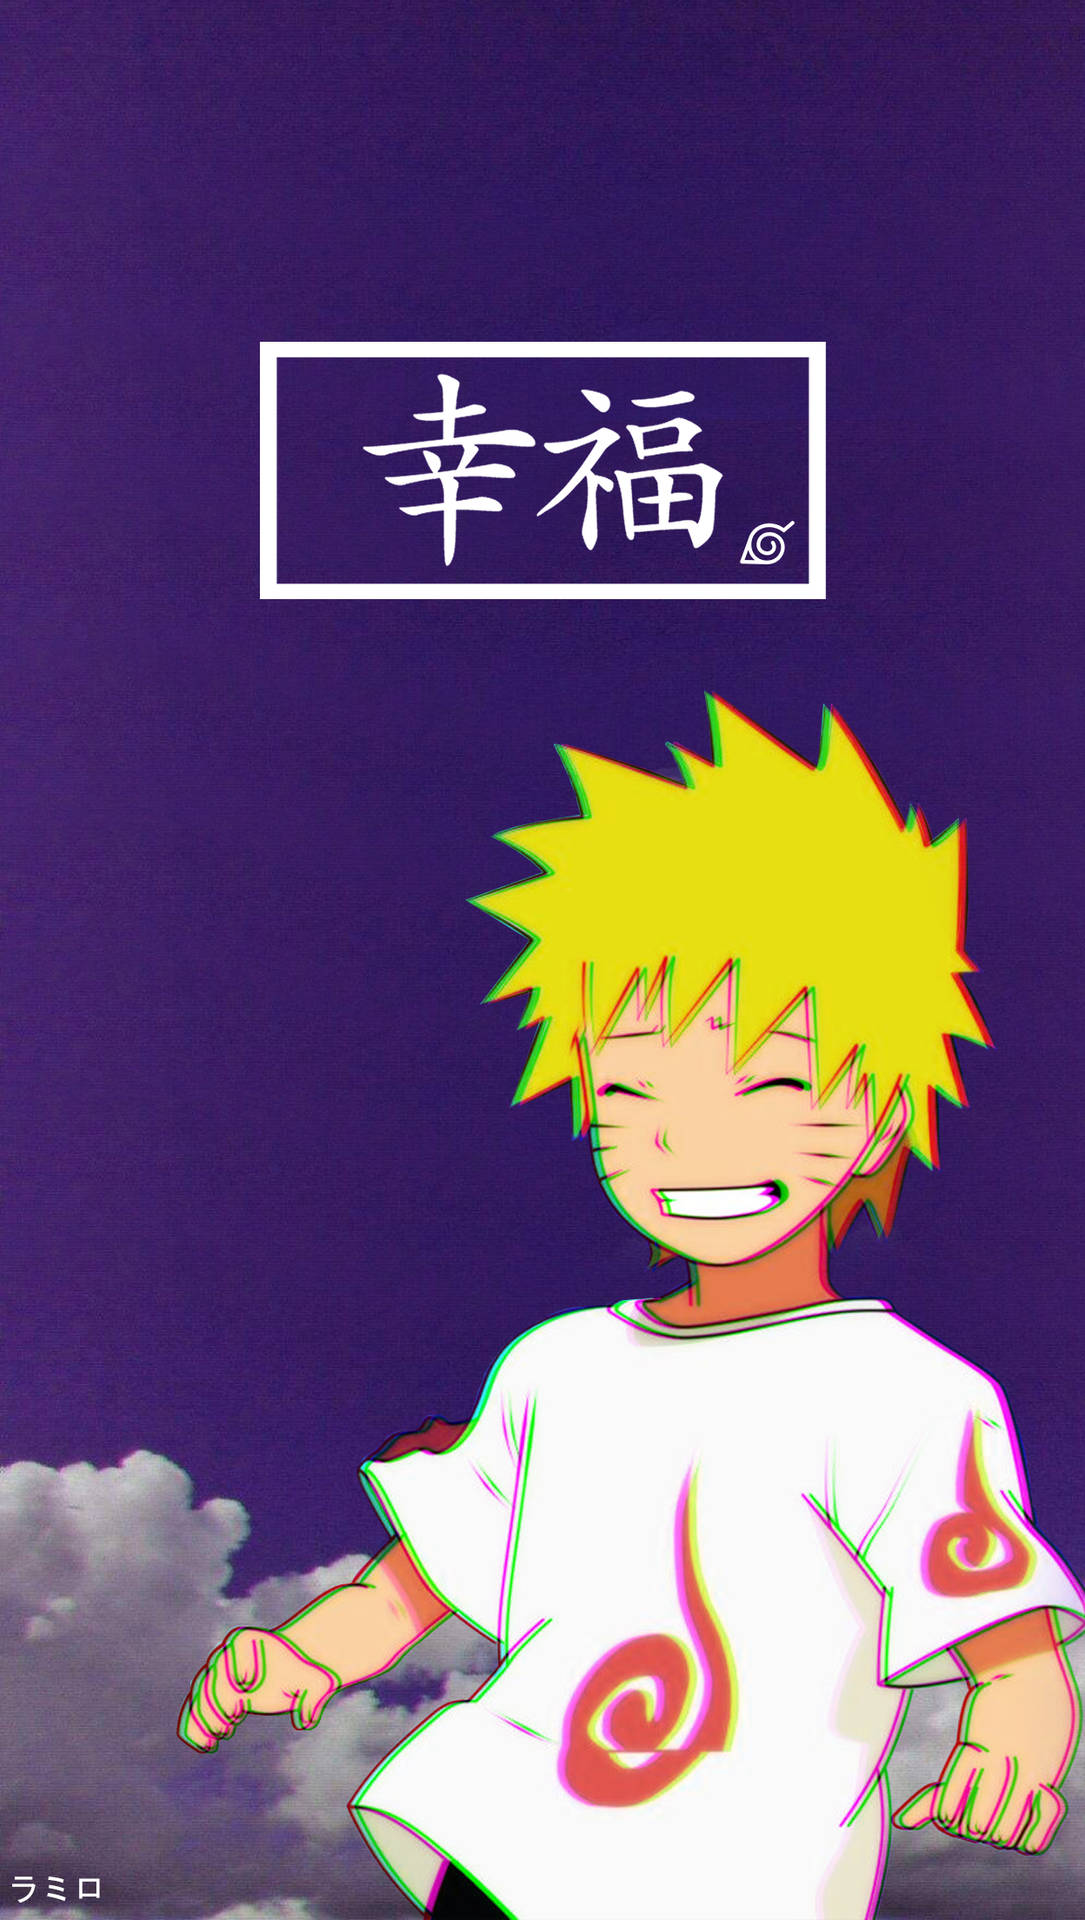 A Naruto Character With A Yellow Shirt And A Purple Background Wallpaper